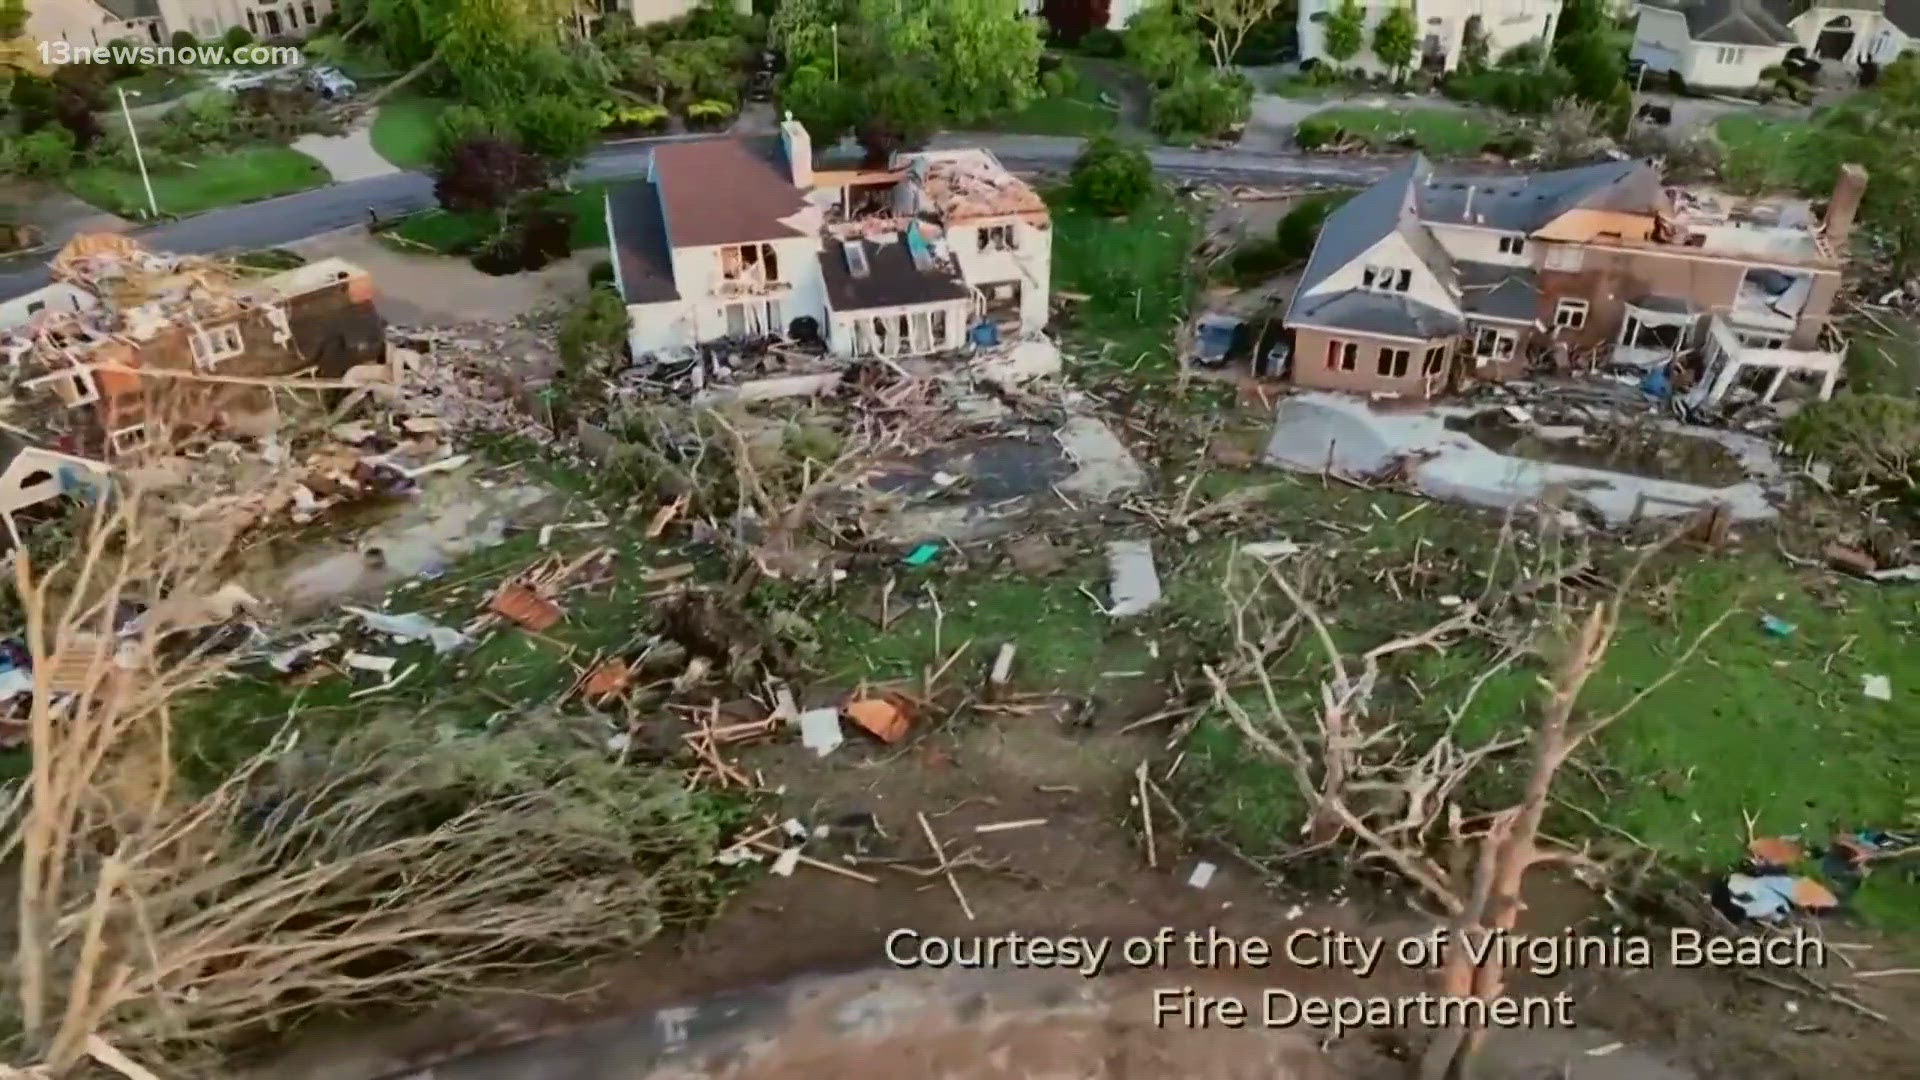 It's been one year since a tornado ripped through a Great Neck neighborhood in Virginia Beach, leaving families devastated by the damage.